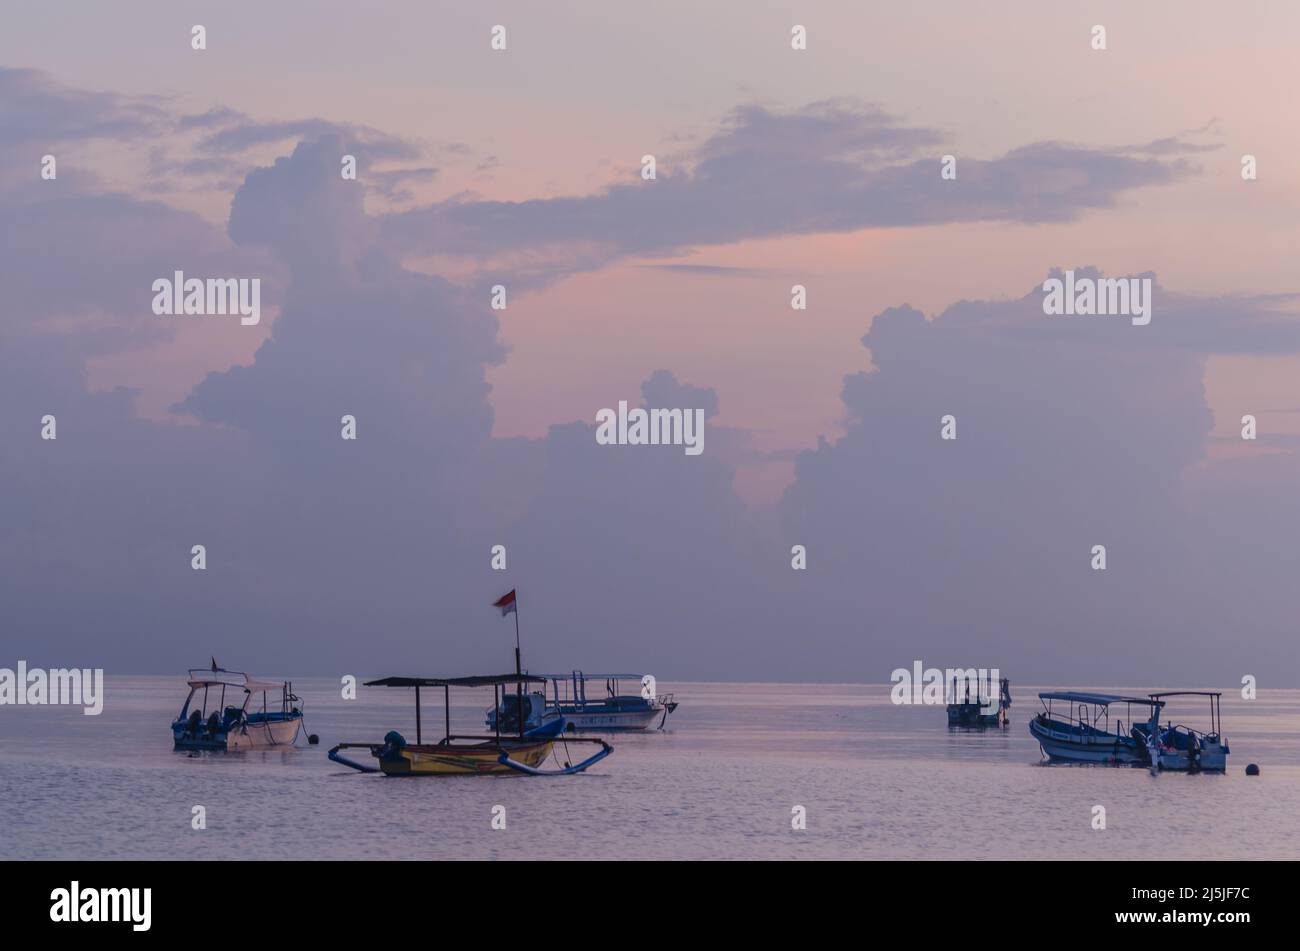 boats in the lilac colored sunrise at the sea Stock Photo